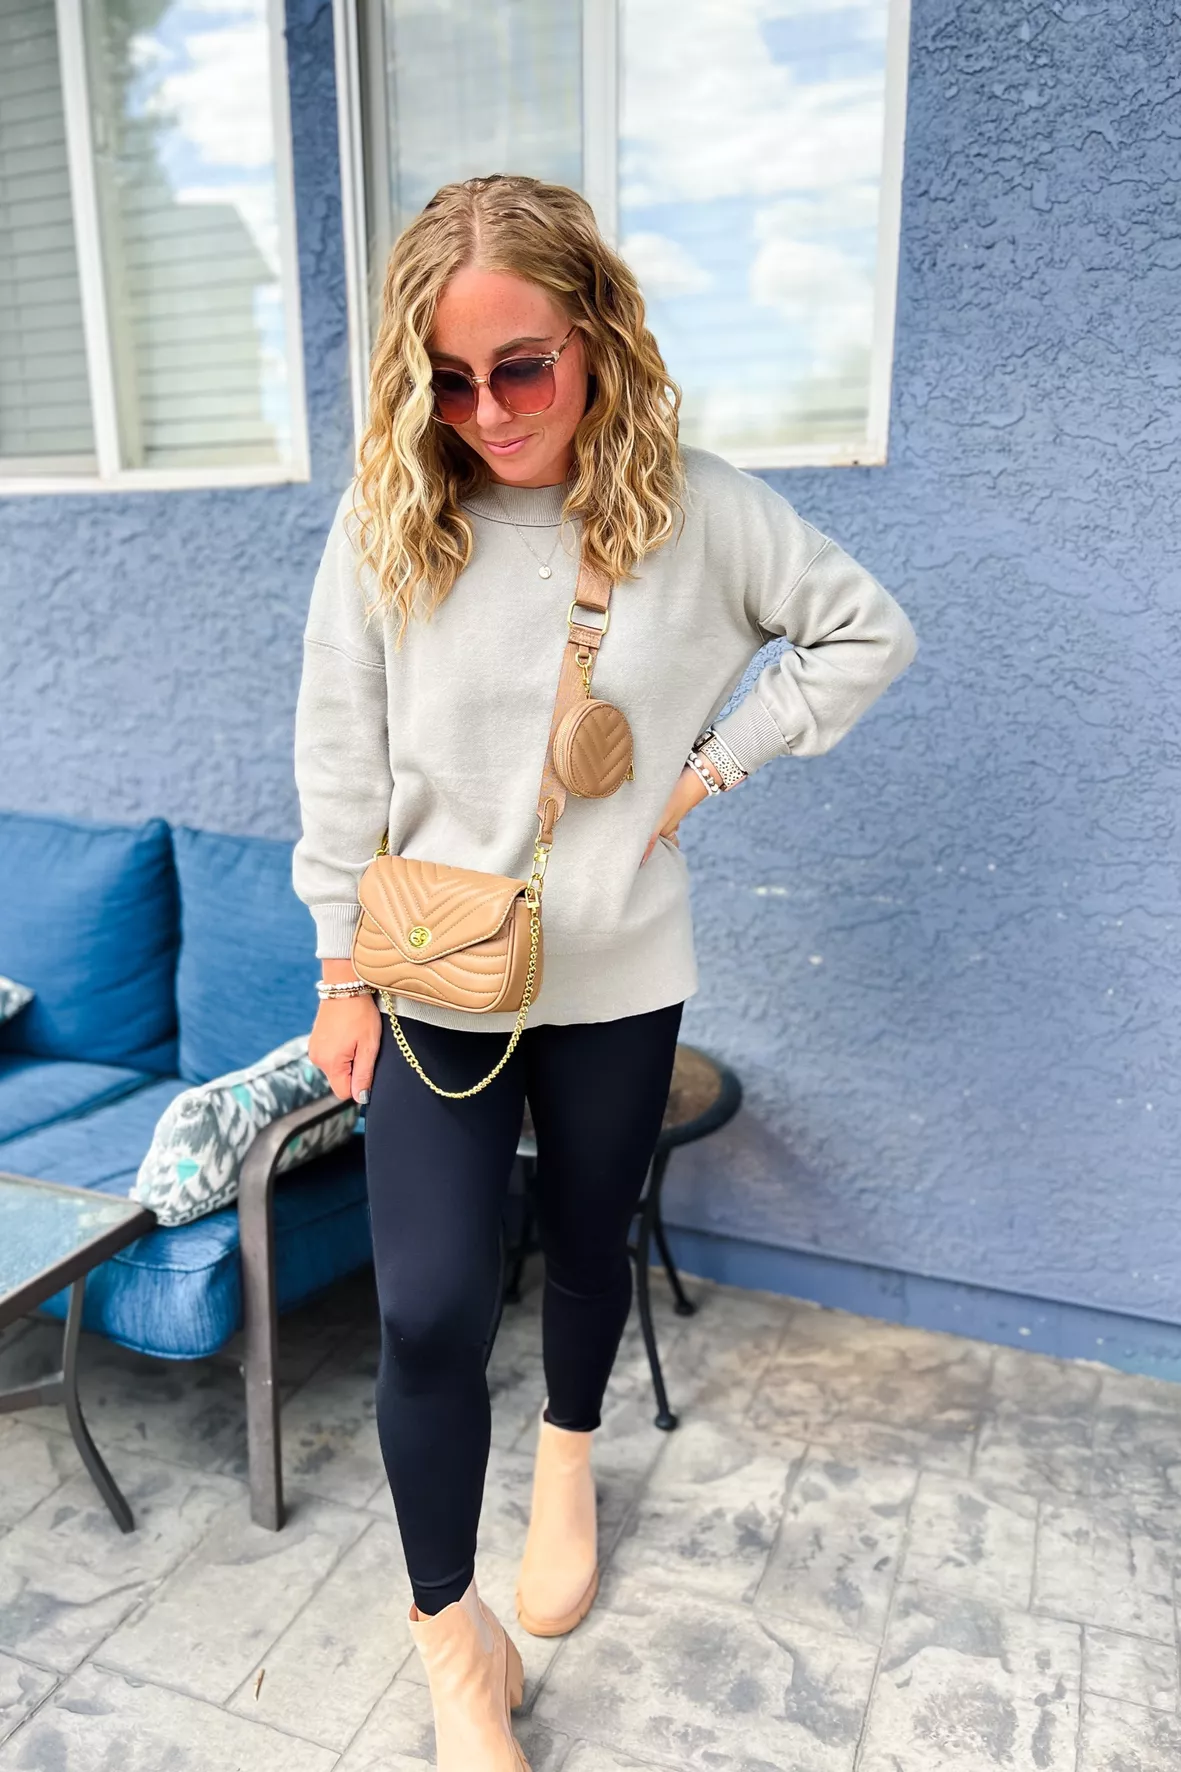 Navy Leggings with Oversized Sweater Outfits (2 ideas & outfits